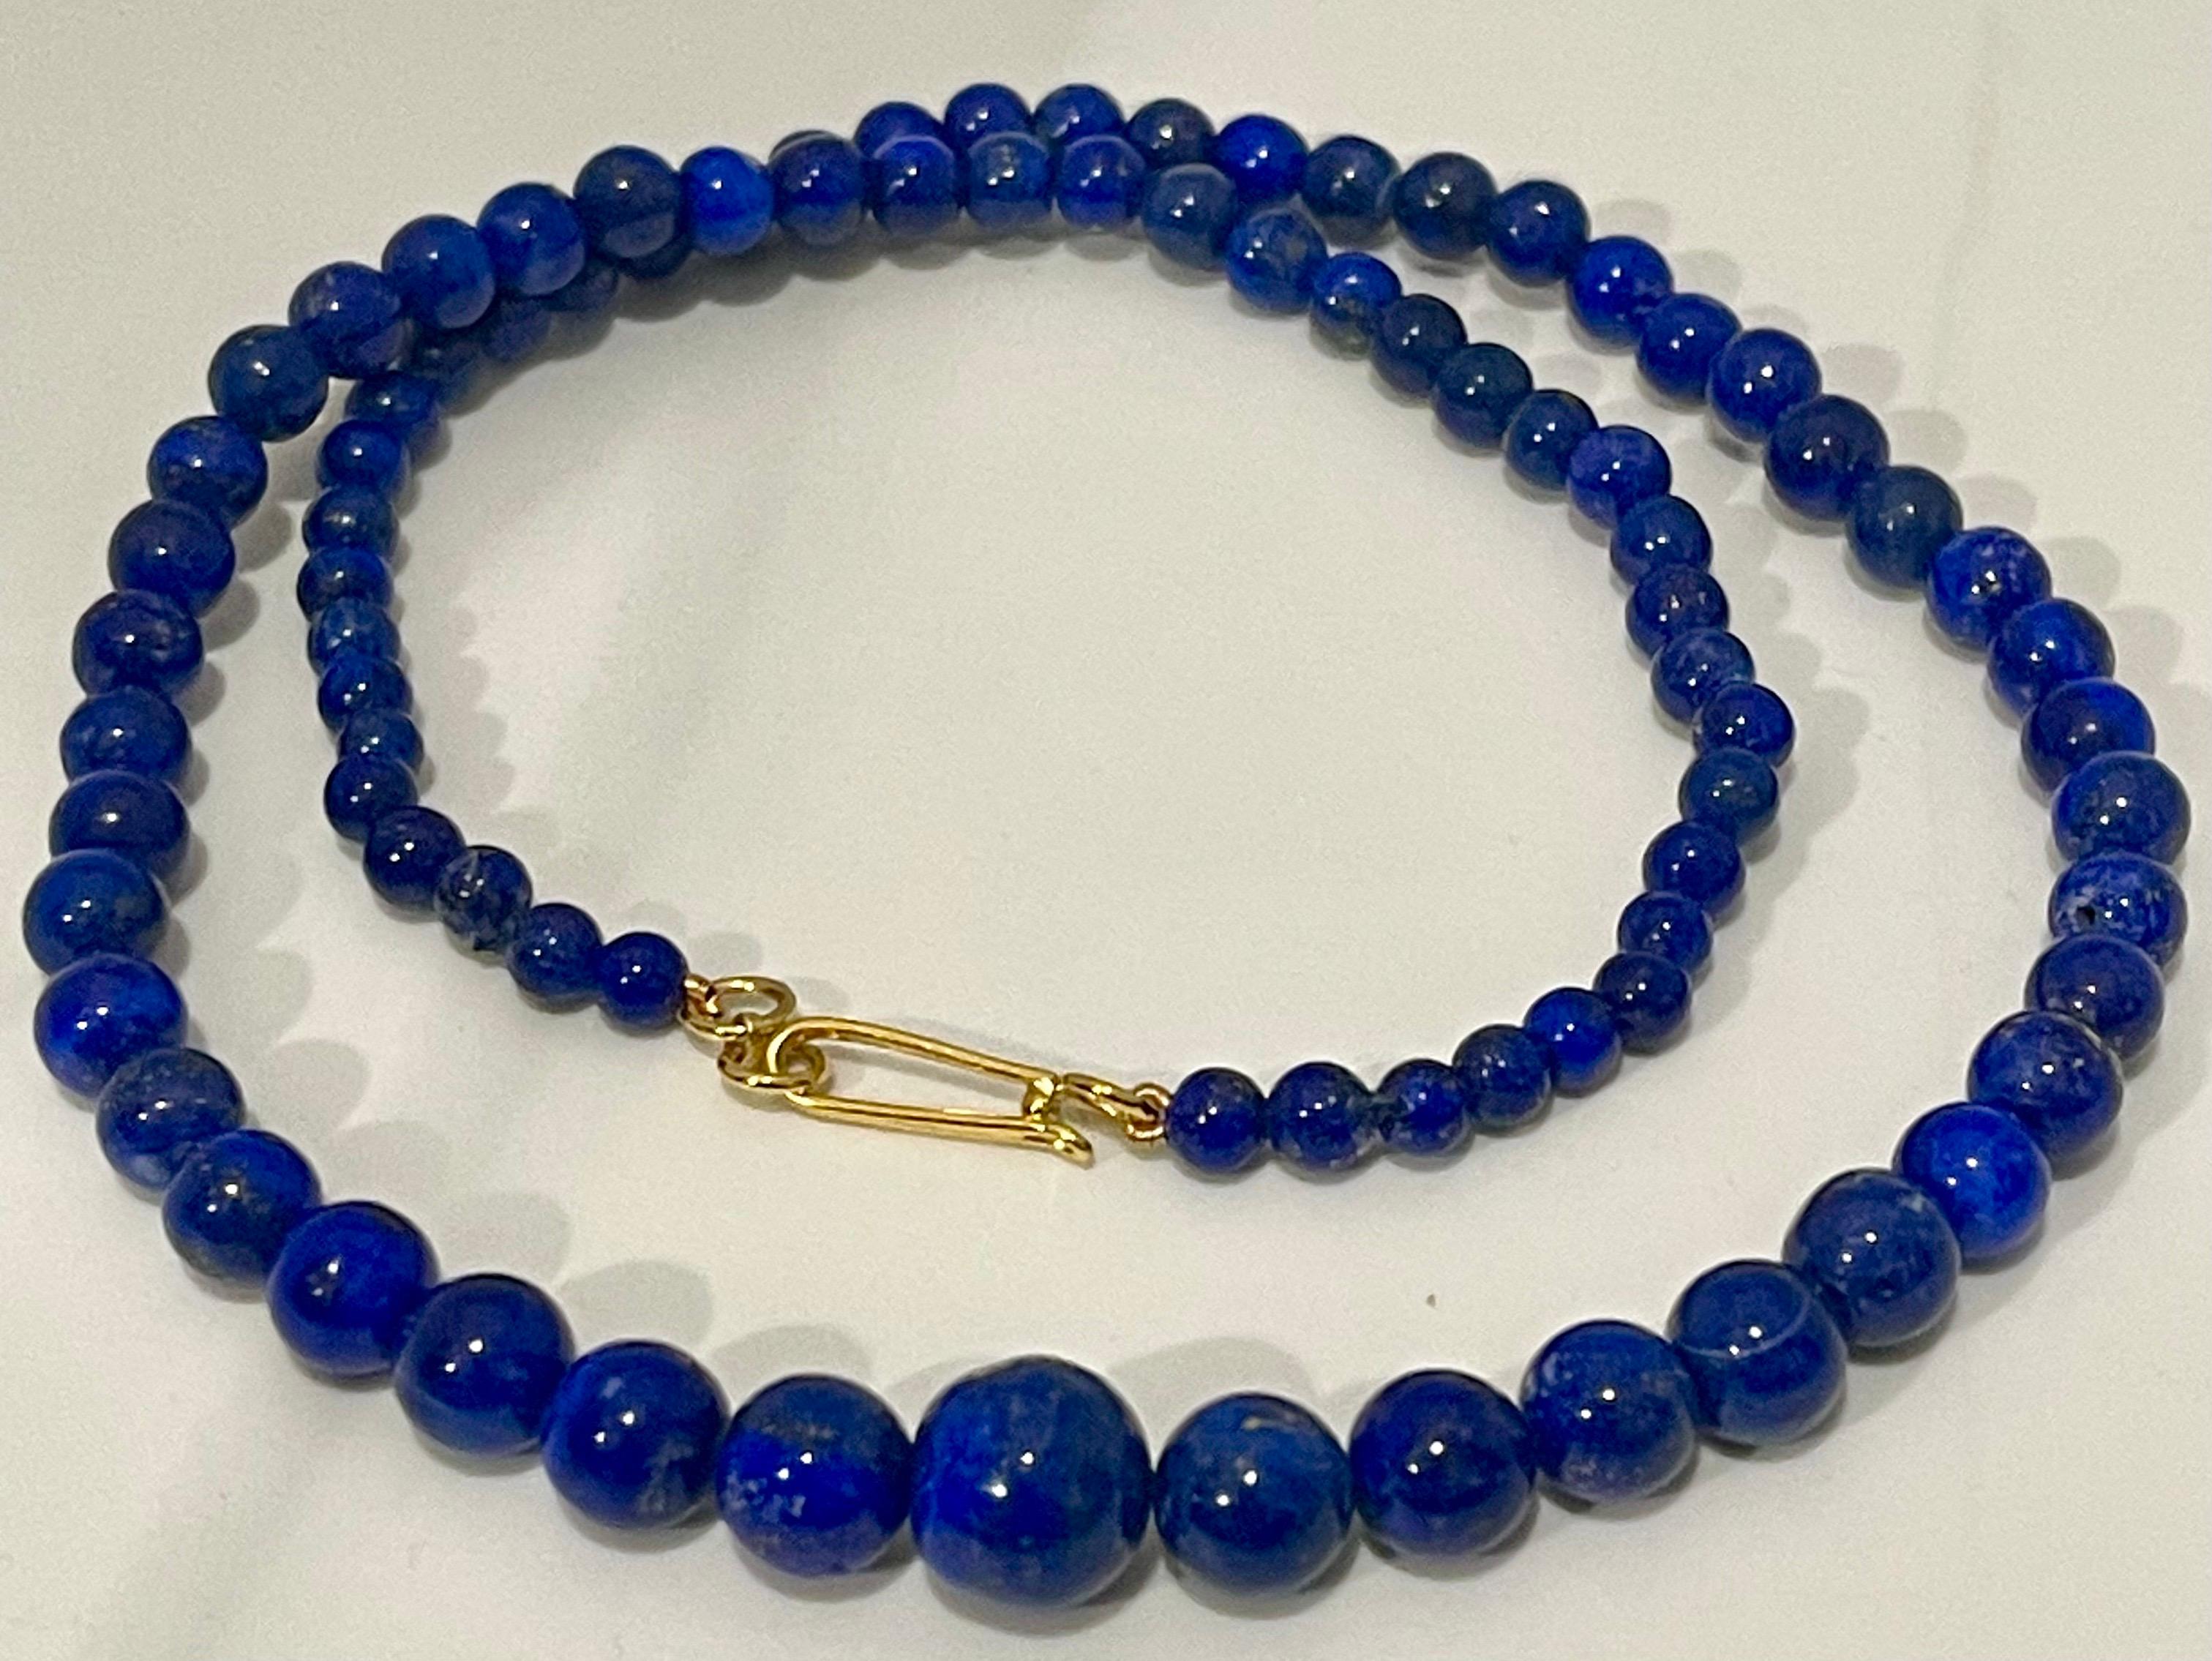 Vintage Lapis Lazuli Single Strand Necklace with 14 Karat Yellow Long Hook Clasp For Sale 2